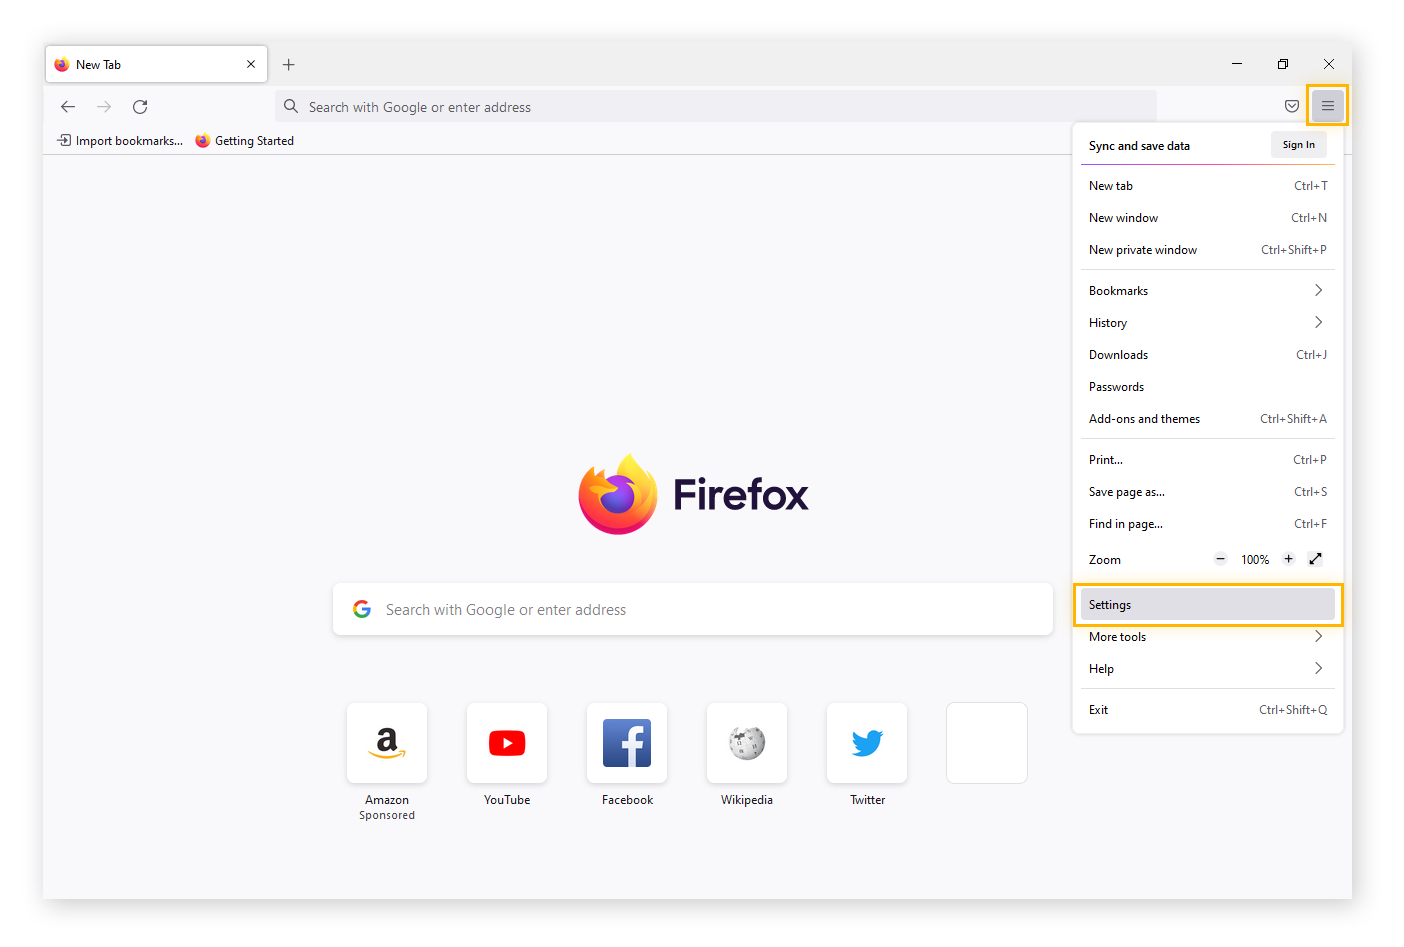 Accessing the Firefox browser settings.